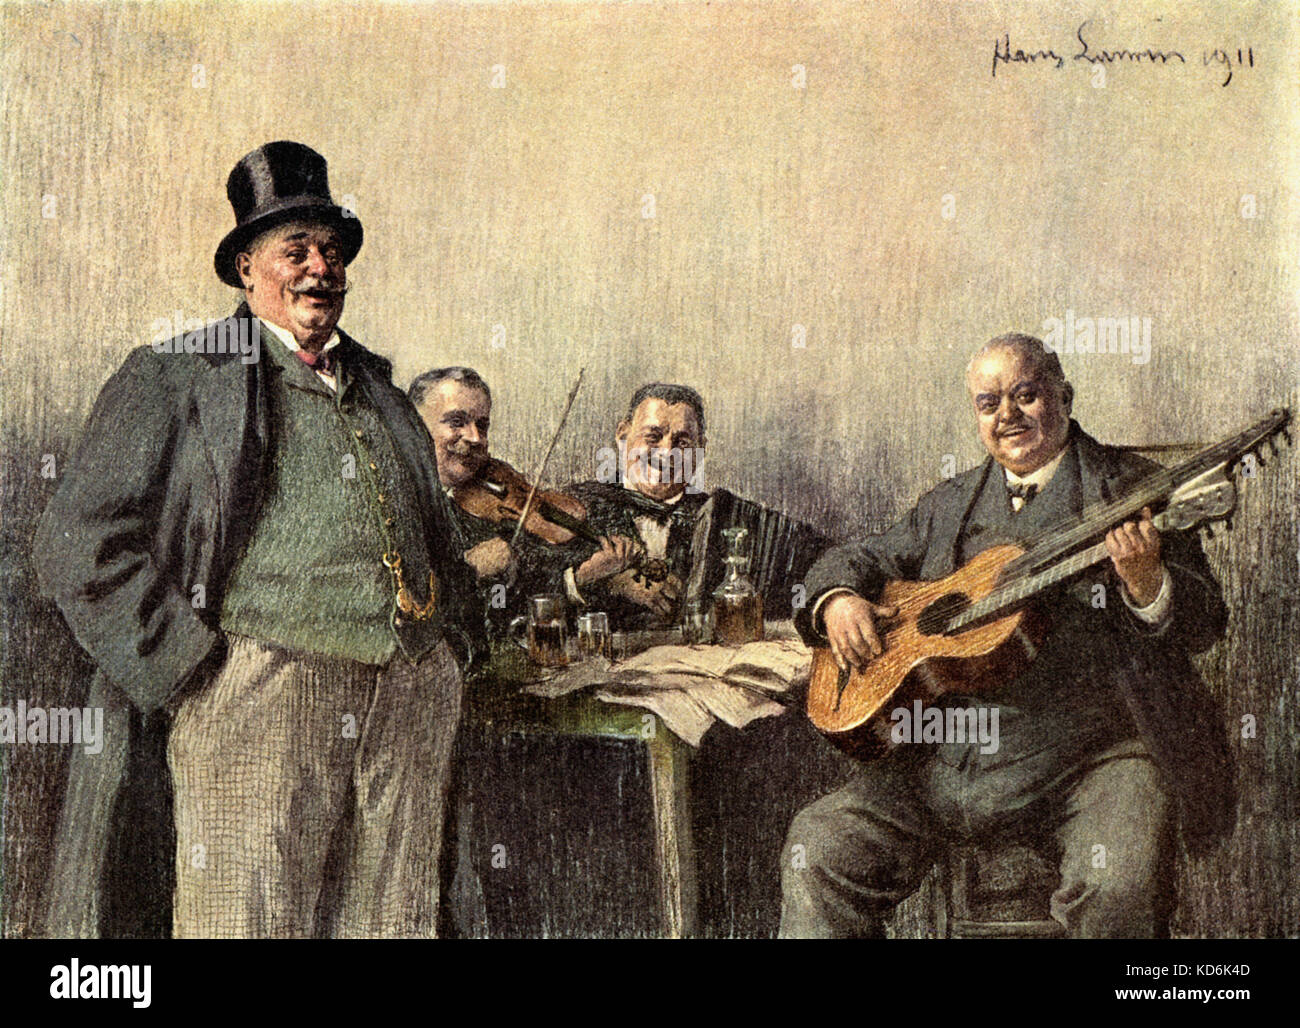 Violin (fiddle), accordion and double-necked (acoustic) guitar being played by trio in Viennese café. Early 20th century Vienna. Illustration by Hans Larwin for book of Viennese songs, entitled 'Der Wiener Liderfänger 'Schuster Franz' ' , dated 1911. Stock Photo